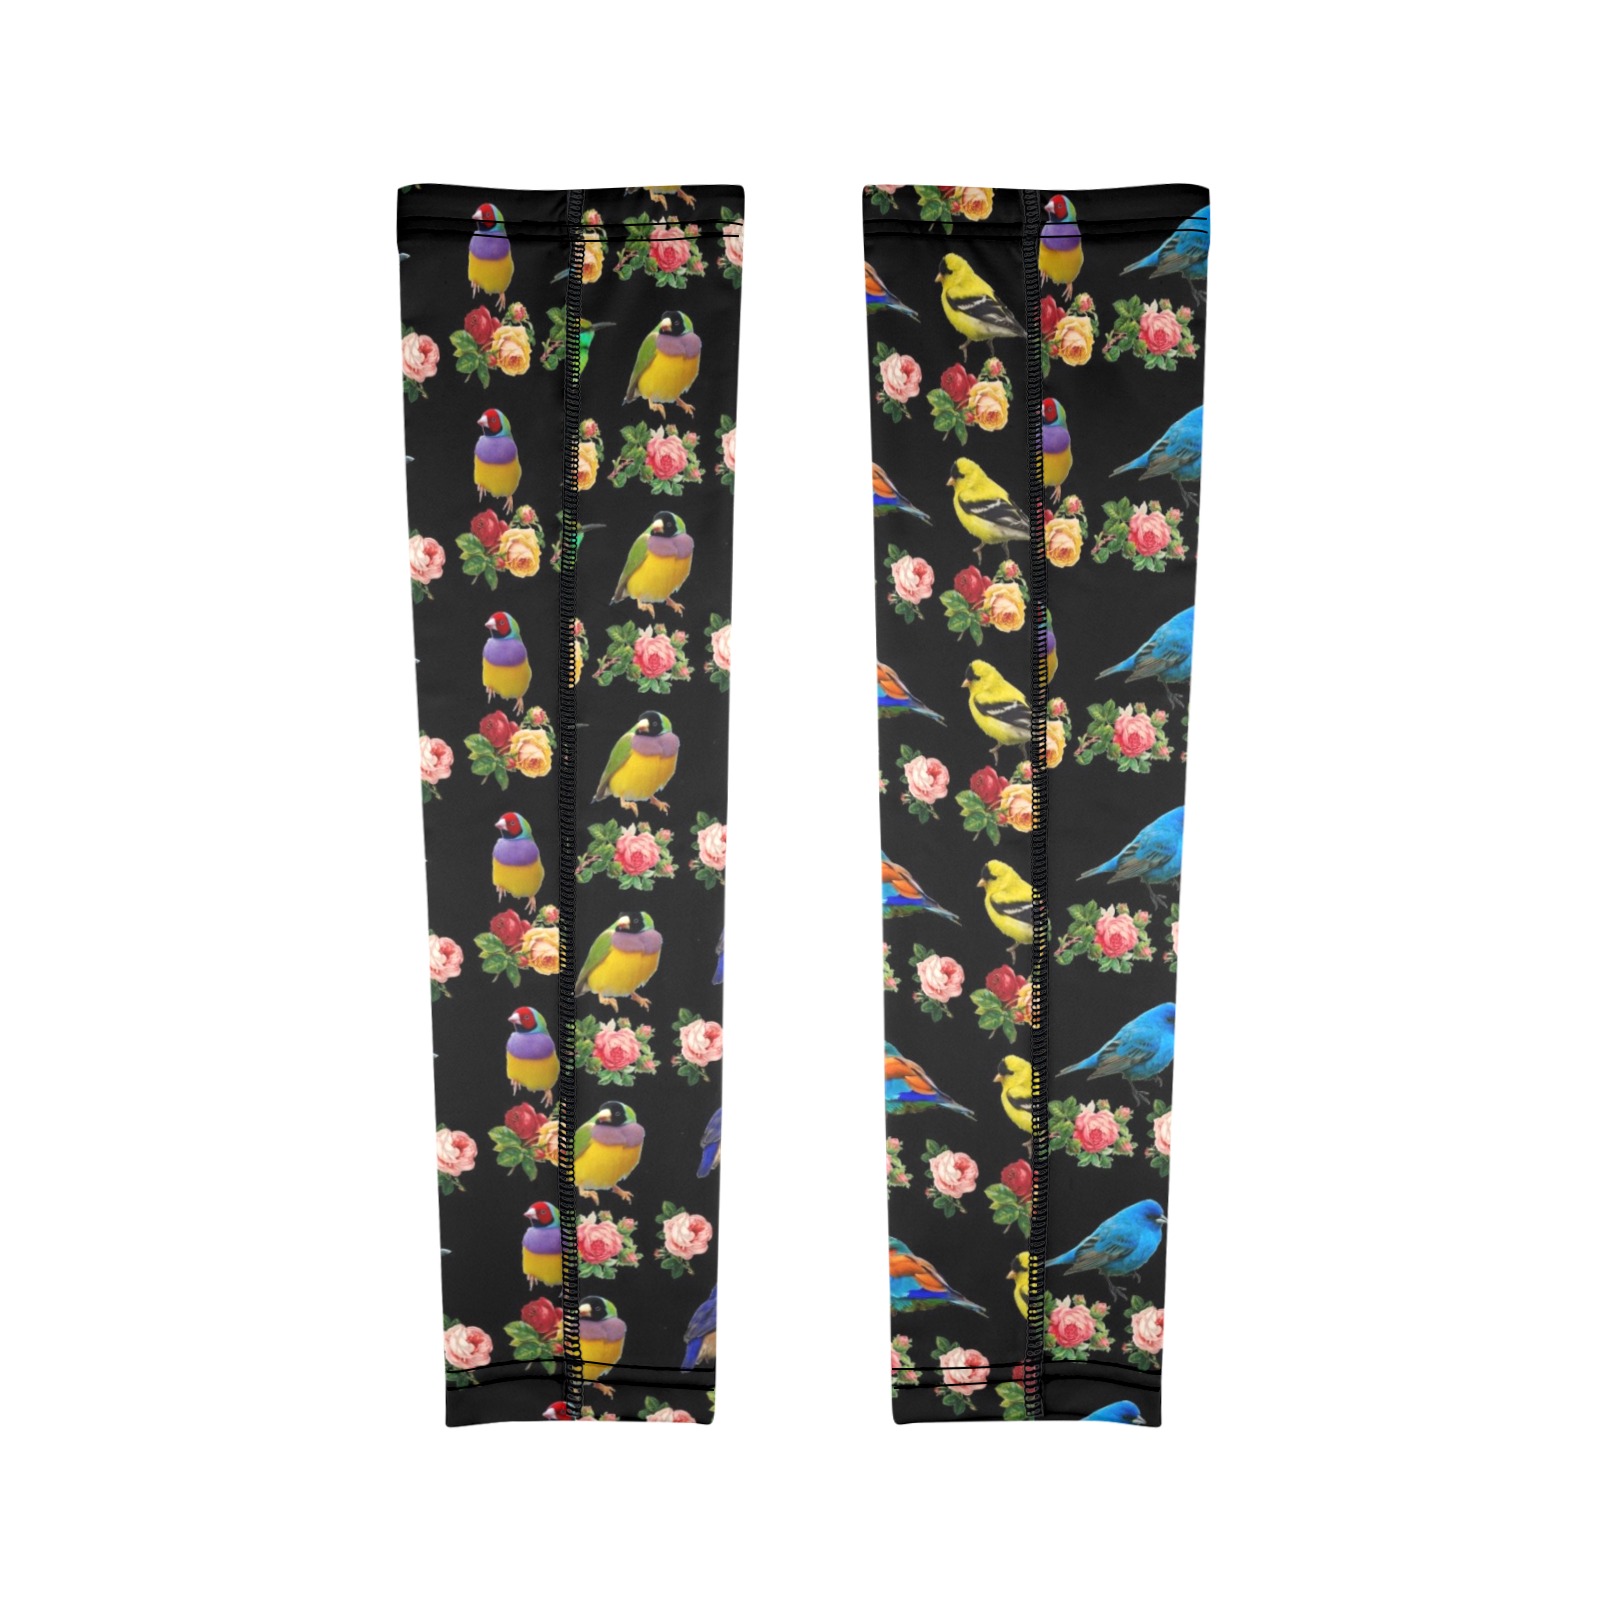 All the Birds and Roses Arm Sleeves (Set of Two with Different Printings)